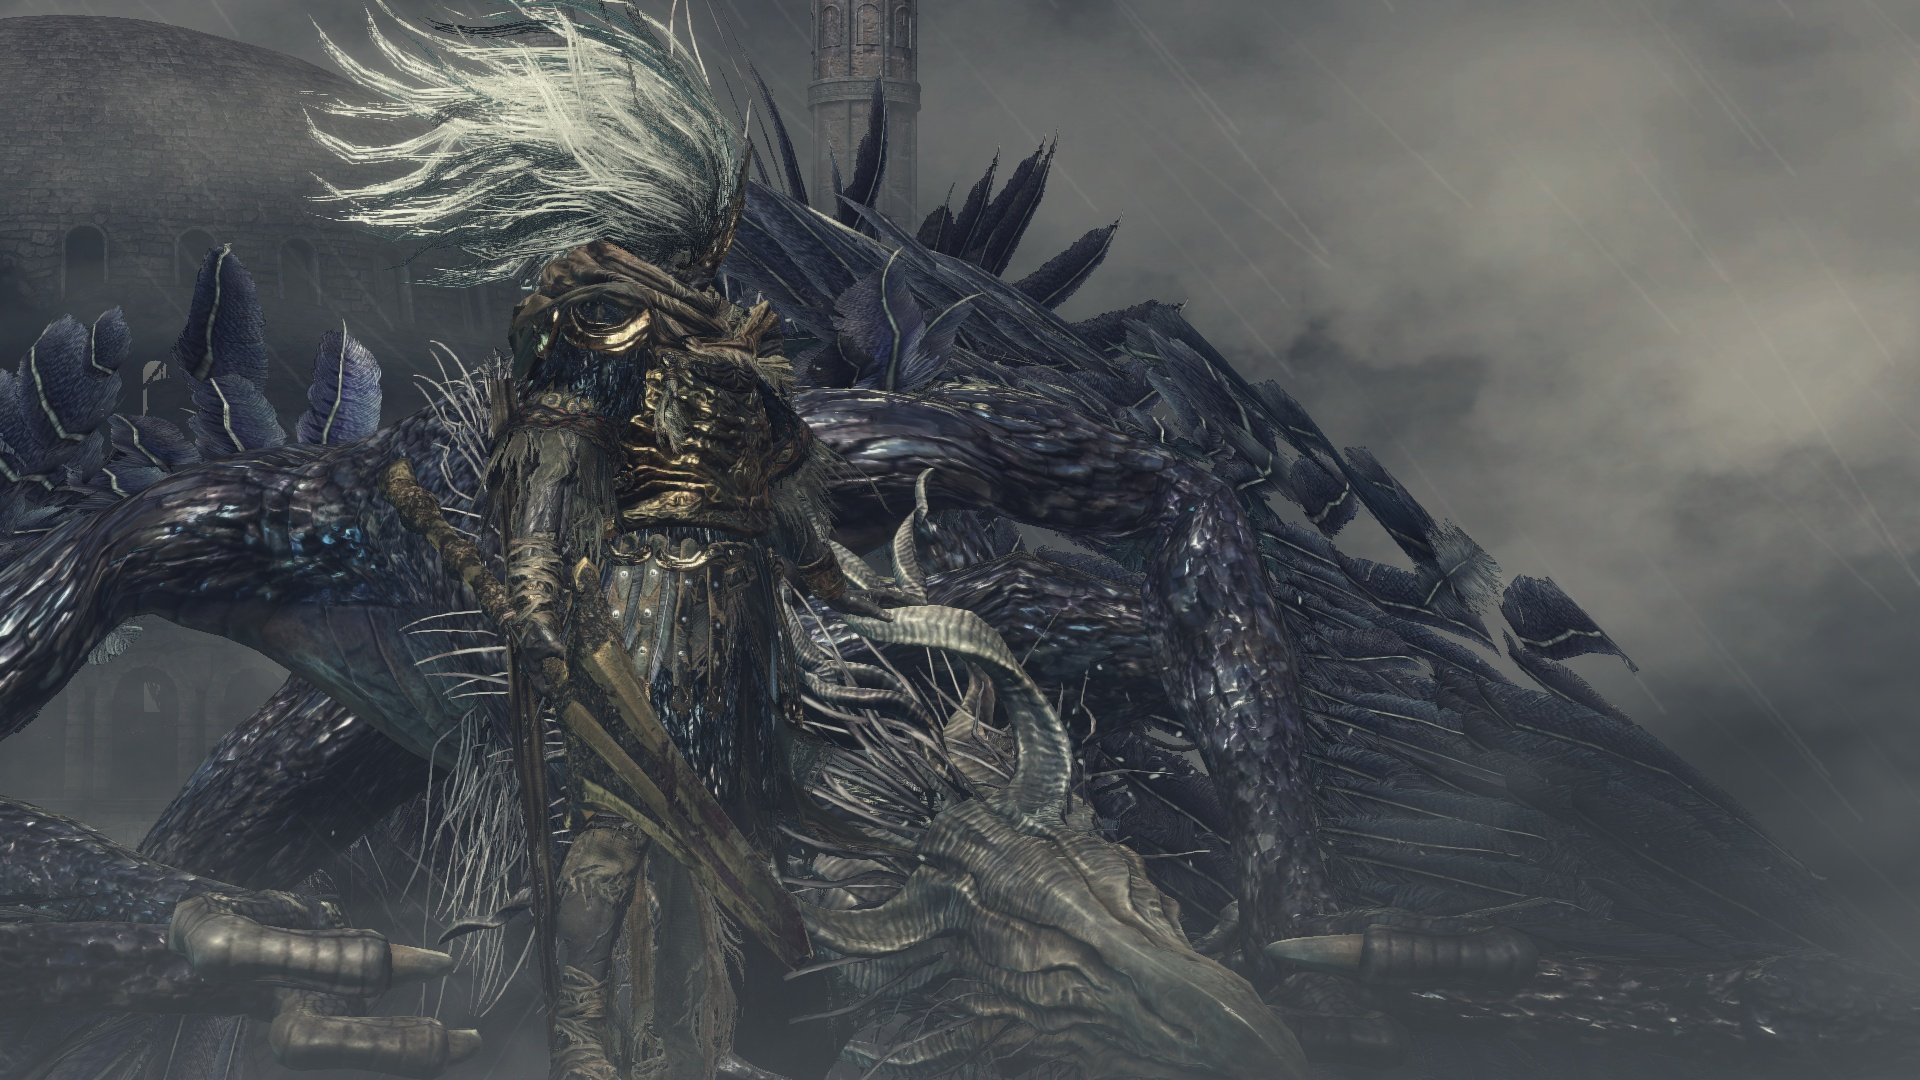 King of the Storm and Nameless King